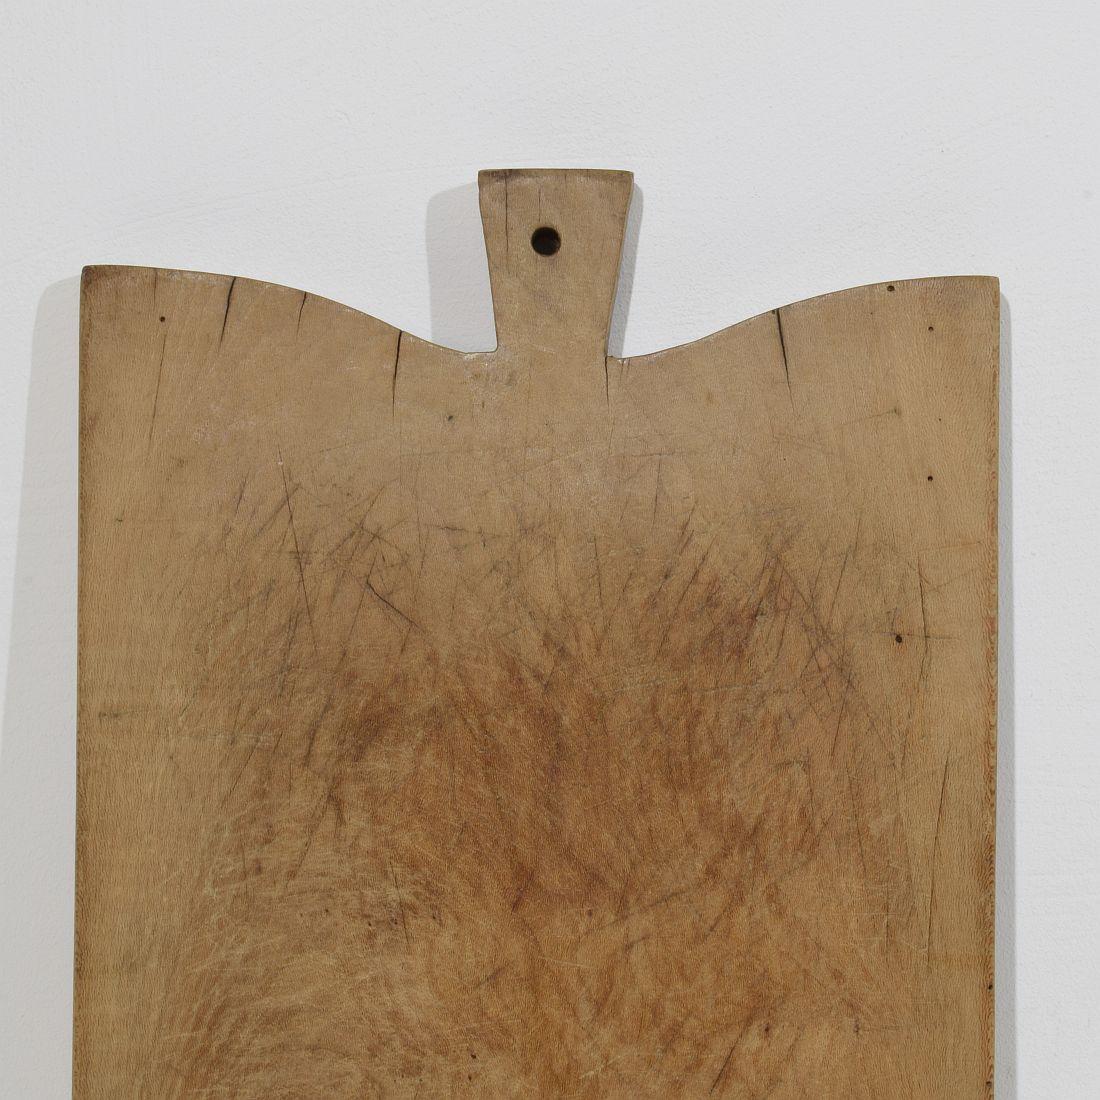 Collection of Three Rare French, 19th Century, Wooden Chopping or Cutting Boards For Sale 2